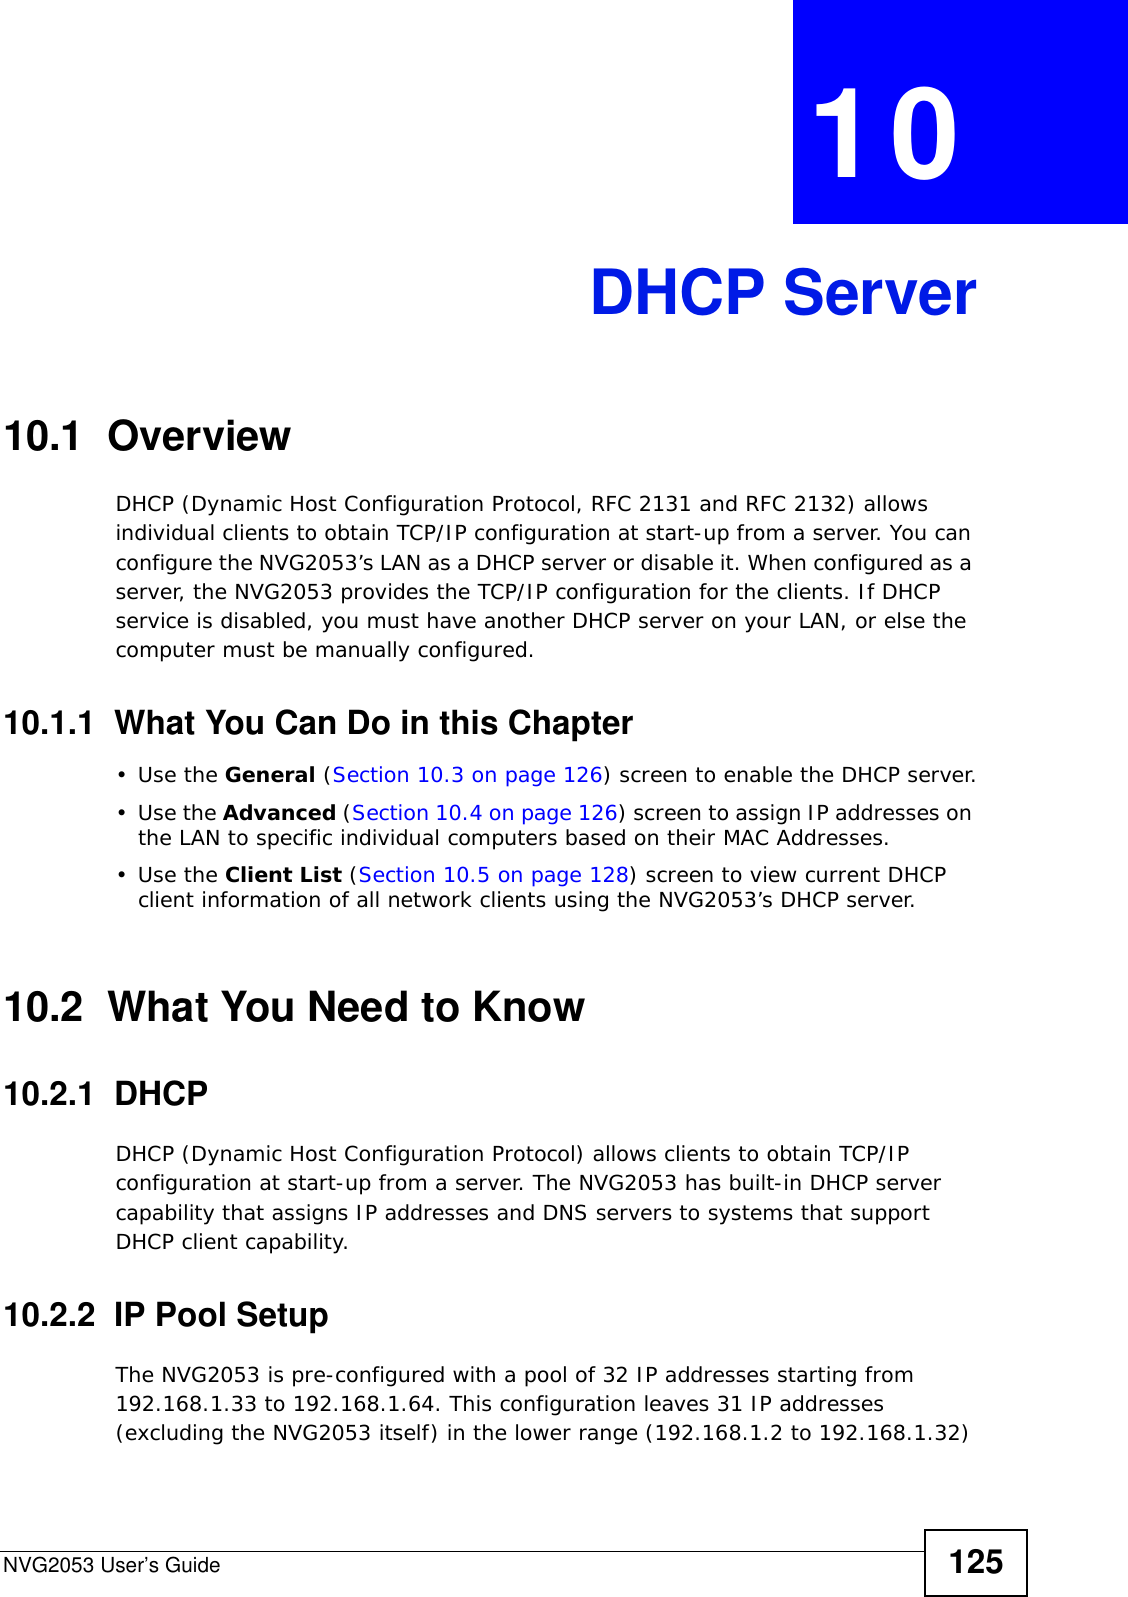 NVG2053 User’s Guide 125CHAPTER  10 DHCP Server10.1  OverviewDHCP (Dynamic Host Configuration Protocol, RFC 2131 and RFC 2132) allows individual clients to obtain TCP/IP configuration at start-up from a server. You can configure the NVG2053’s LAN as a DHCP server or disable it. When configured as a server, the NVG2053 provides the TCP/IP configuration for the clients. If DHCP service is disabled, you must have another DHCP server on your LAN, or else the computer must be manually configured.10.1.1  What You Can Do in this Chapter•Use the General (Section 10.3 on page 126) screen to enable the DHCP server.•Use the Advanced (Section 10.4 on page 126) screen to assign IP addresses on the LAN to specific individual computers based on their MAC Addresses.•Use the Client List (Section 10.5 on page 128) screen to view current DHCP client information of all network clients using the NVG2053’s DHCP server.10.2  What You Need to Know10.2.1  DHCP DHCP (Dynamic Host Configuration Protocol) allows clients to obtain TCP/IP configuration at start-up from a server. The NVG2053 has built-in DHCP server capability that assigns IP addresses and DNS servers to systems that support DHCP client capability.10.2.2  IP Pool SetupThe NVG2053 is pre-configured with a pool of 32 IP addresses starting from 192.168.1.33 to 192.168.1.64. This configuration leaves 31 IP addresses (excluding the NVG2053 itself) in the lower range (192.168.1.2 to 192.168.1.32) 